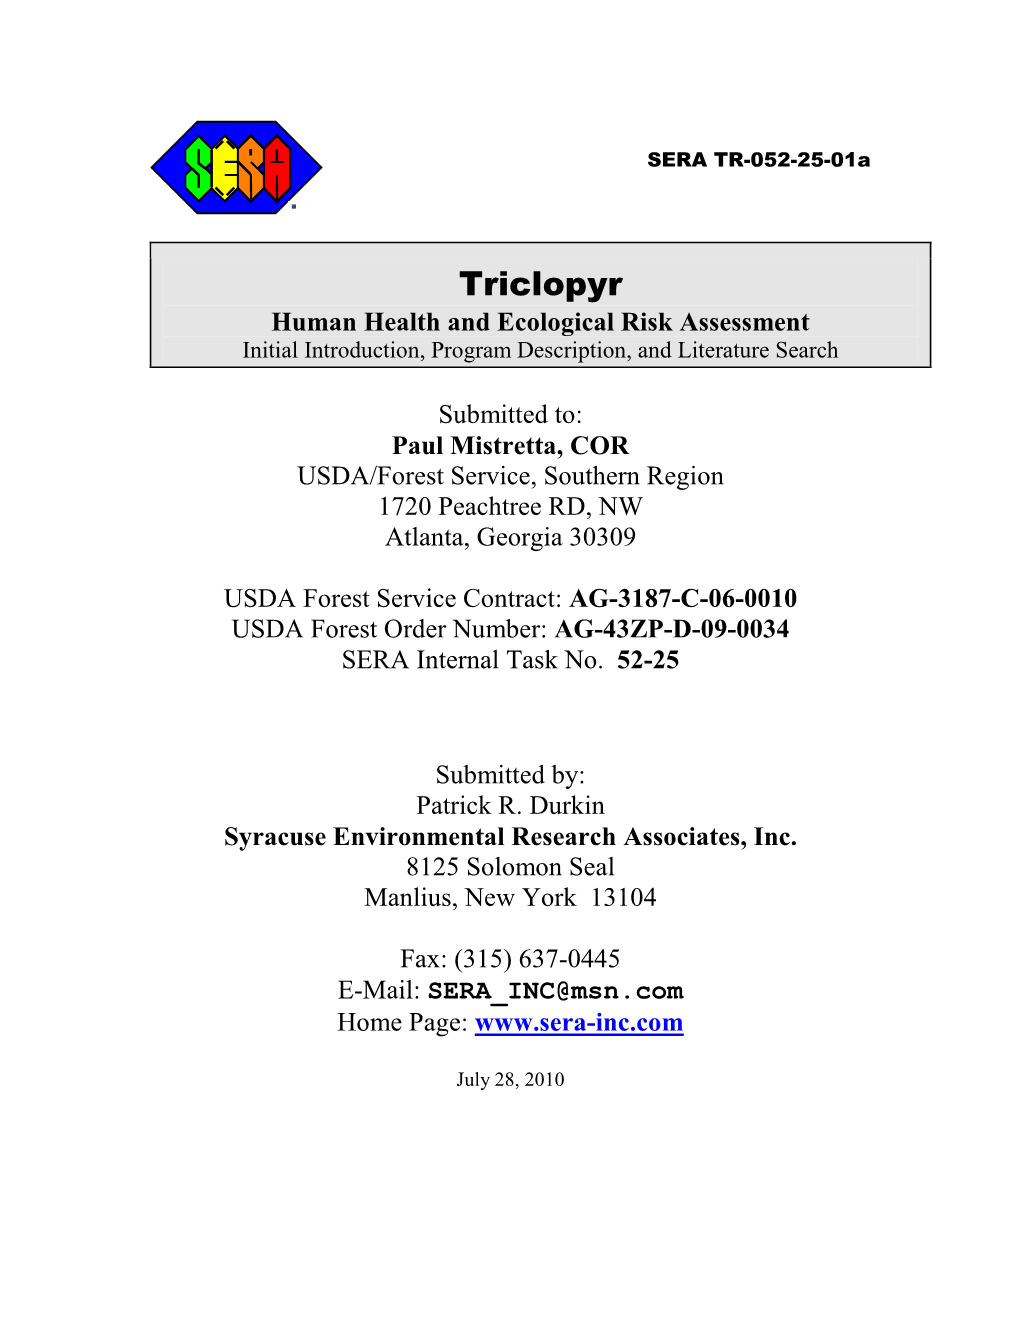 Triclopyr Human Health and Ecological Risk Assessment Initial Introduction, Program Description, and Literature Search